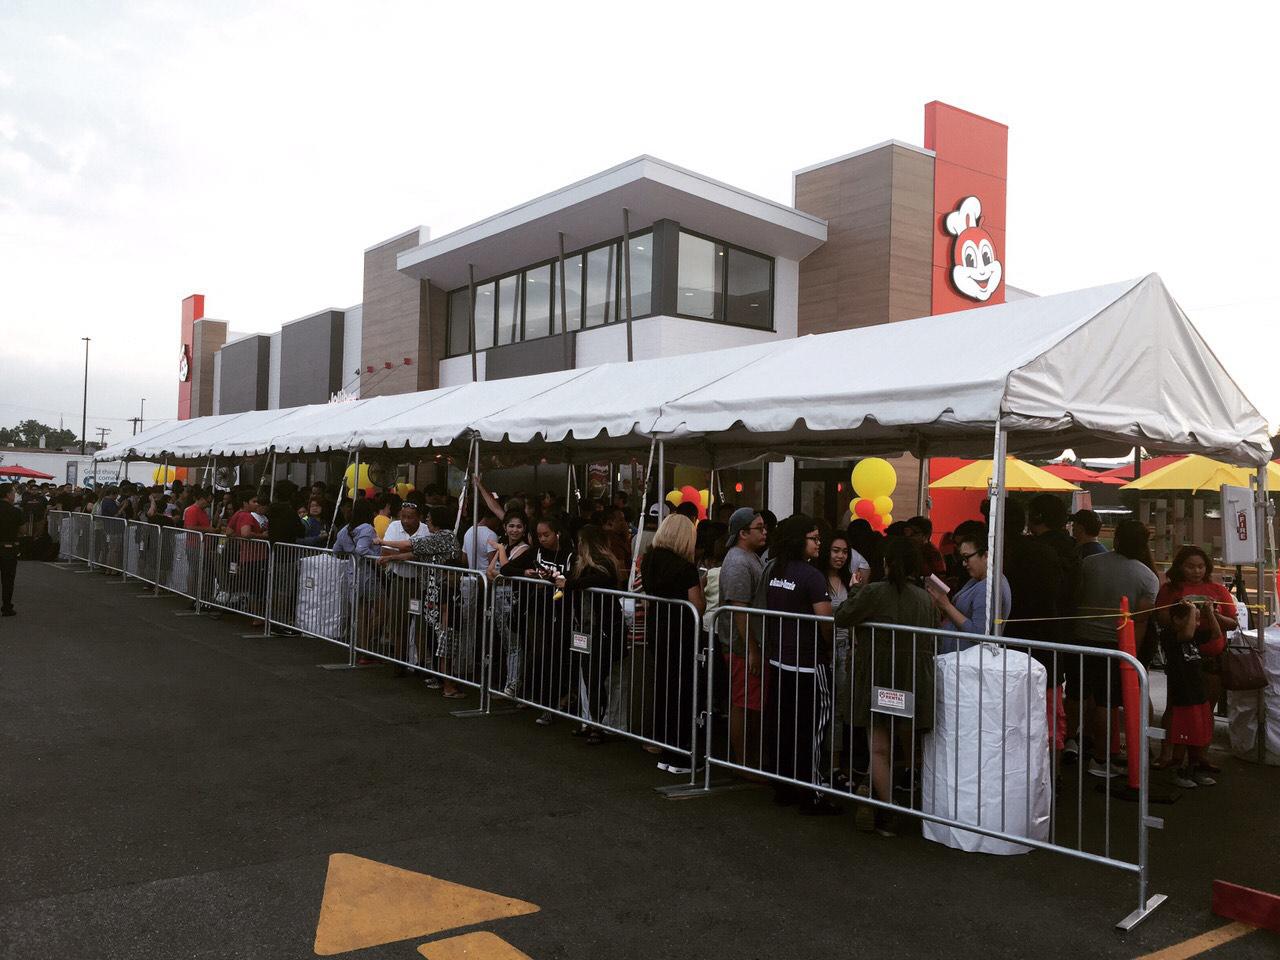 It has been three weeks since Jollibee opened in Skokie and still the lines are not getting any shorter – a certified warm Filipino welcome for everyone’s best friend.